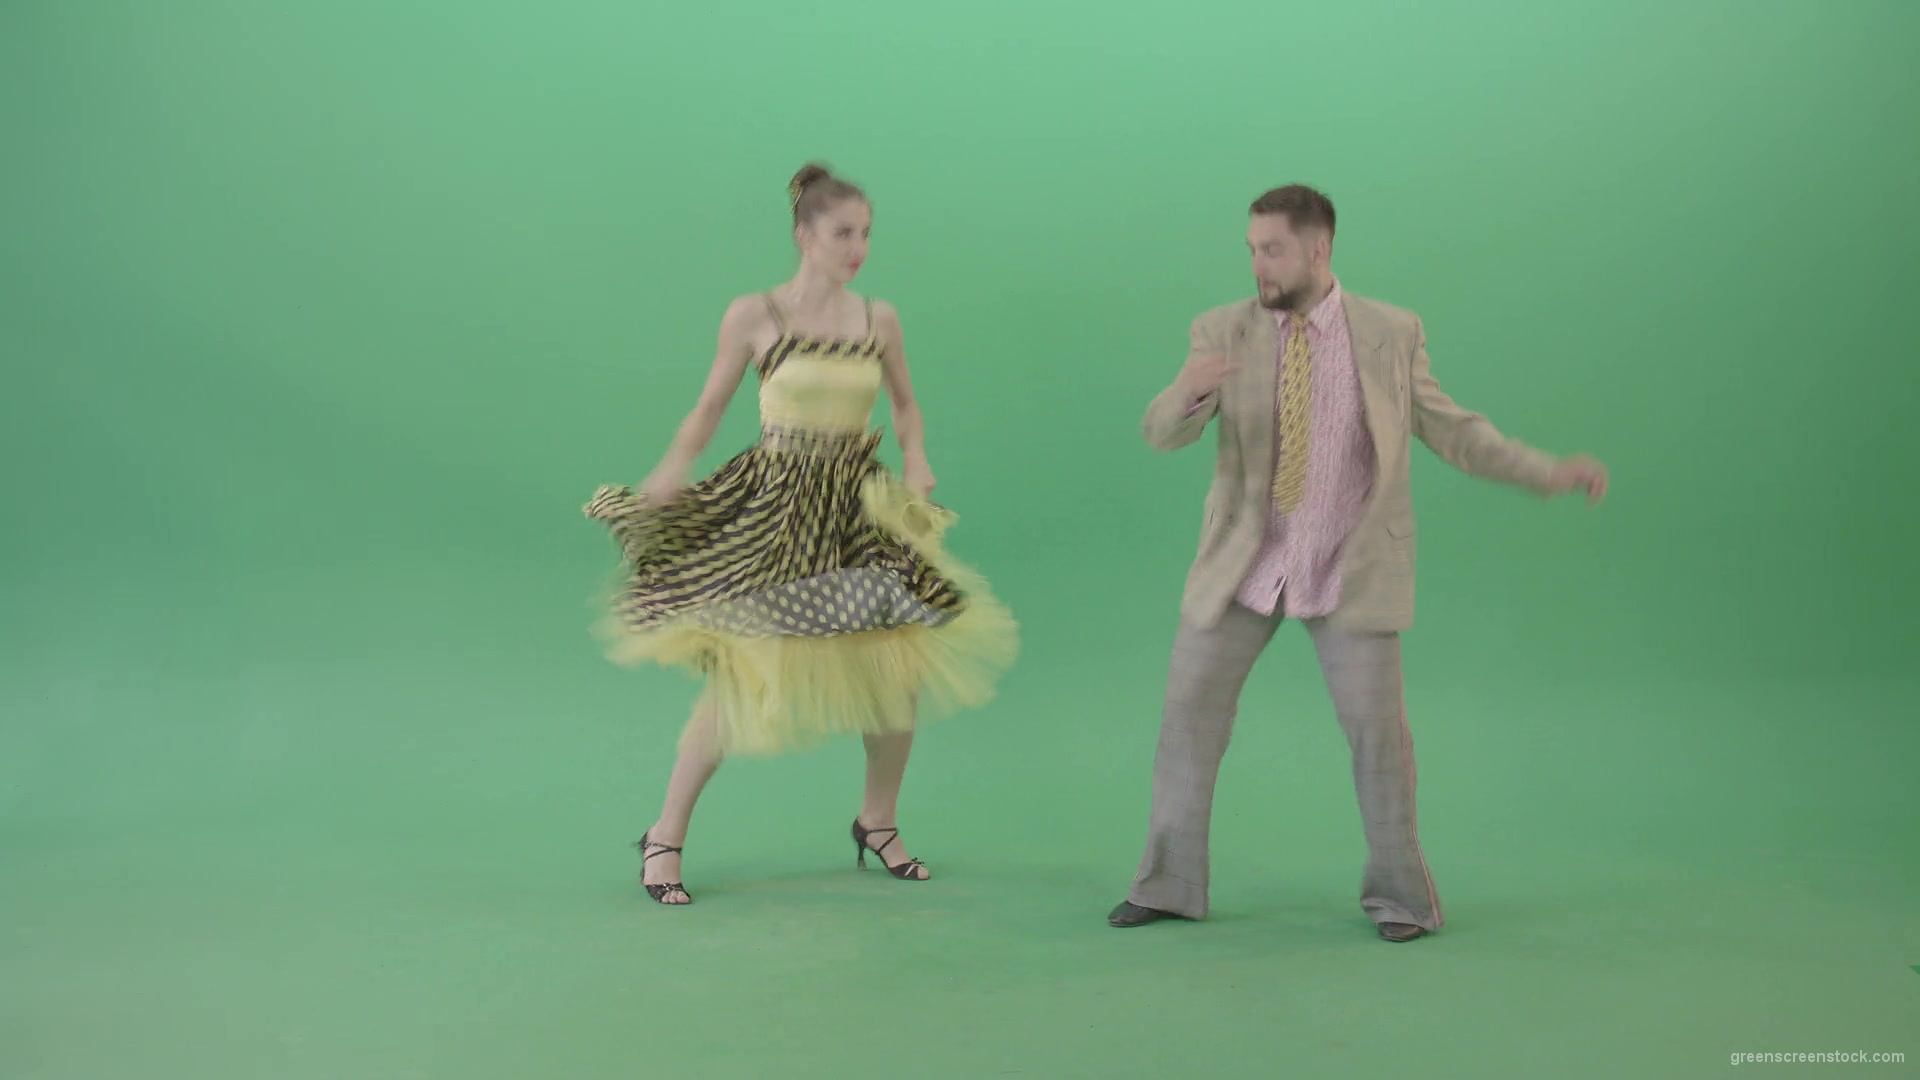 Beautiful-man-and-woman-dancing-Lindy-Hop-Jazz-and-Swing-dance-isolated-on-Green-Screen-4K-Video-Footage-1920_005 Green Screen Stock